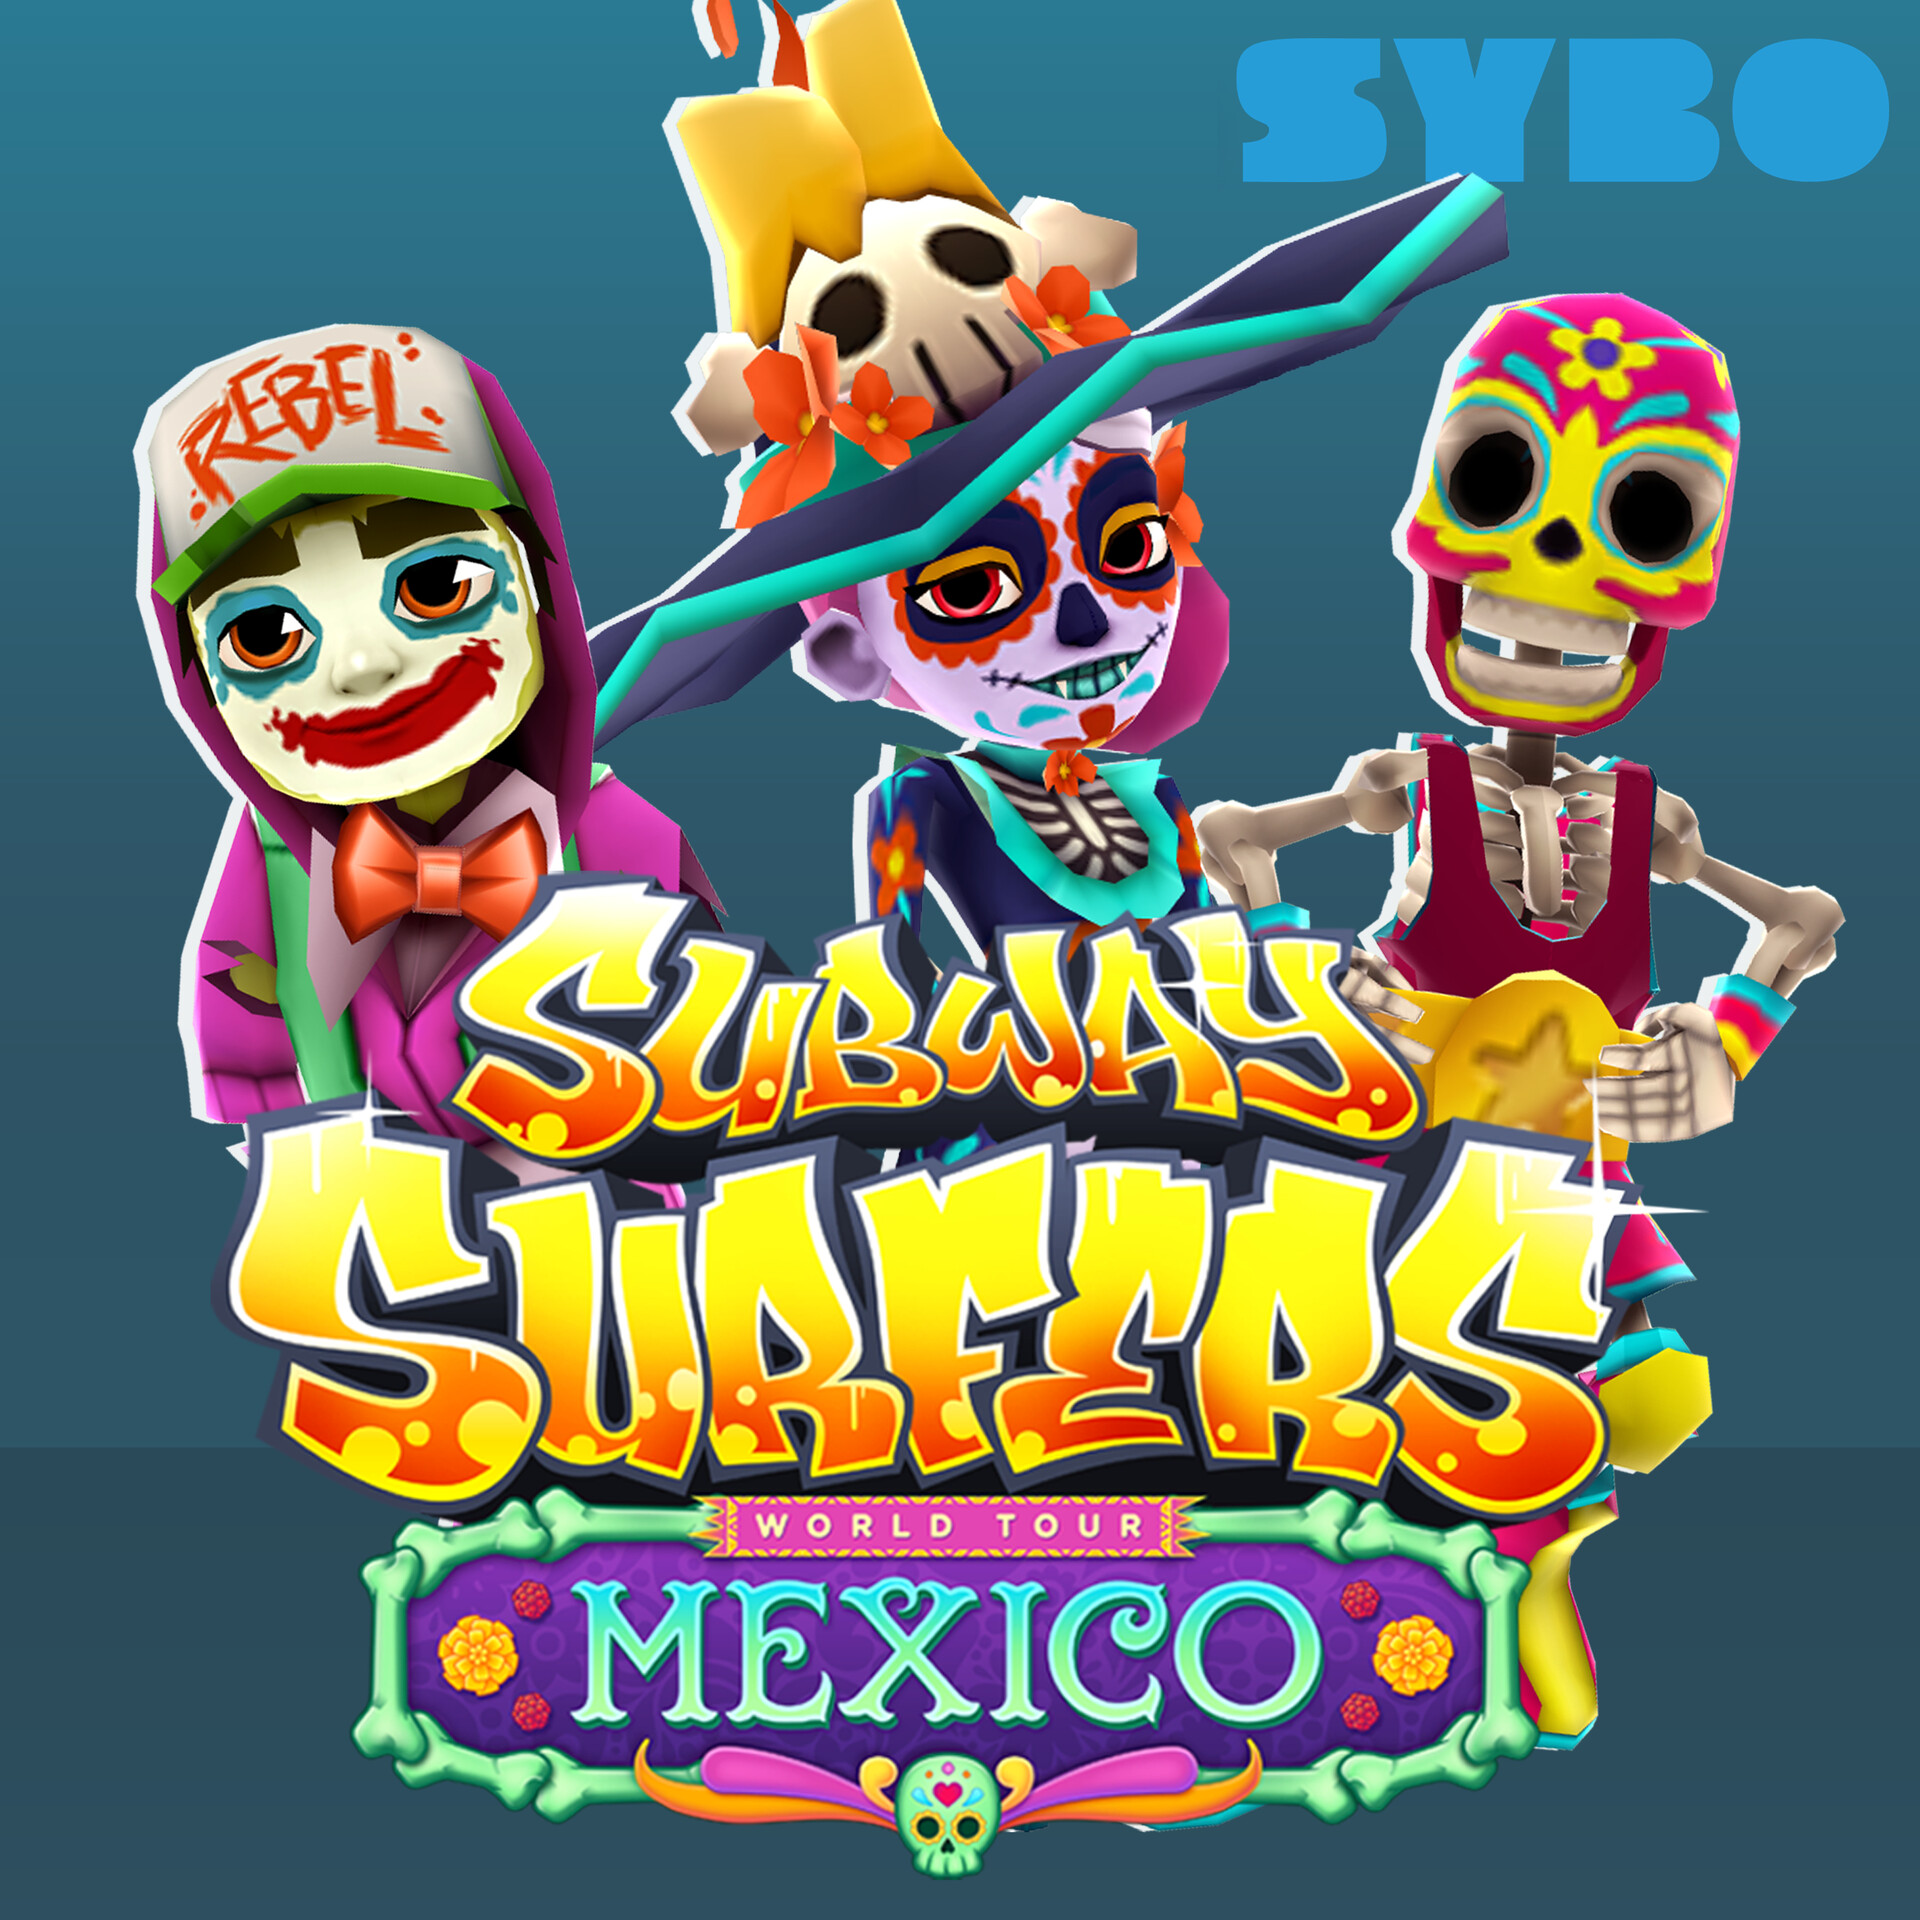 Latest update for Subway Surfers game takes you to Maxico